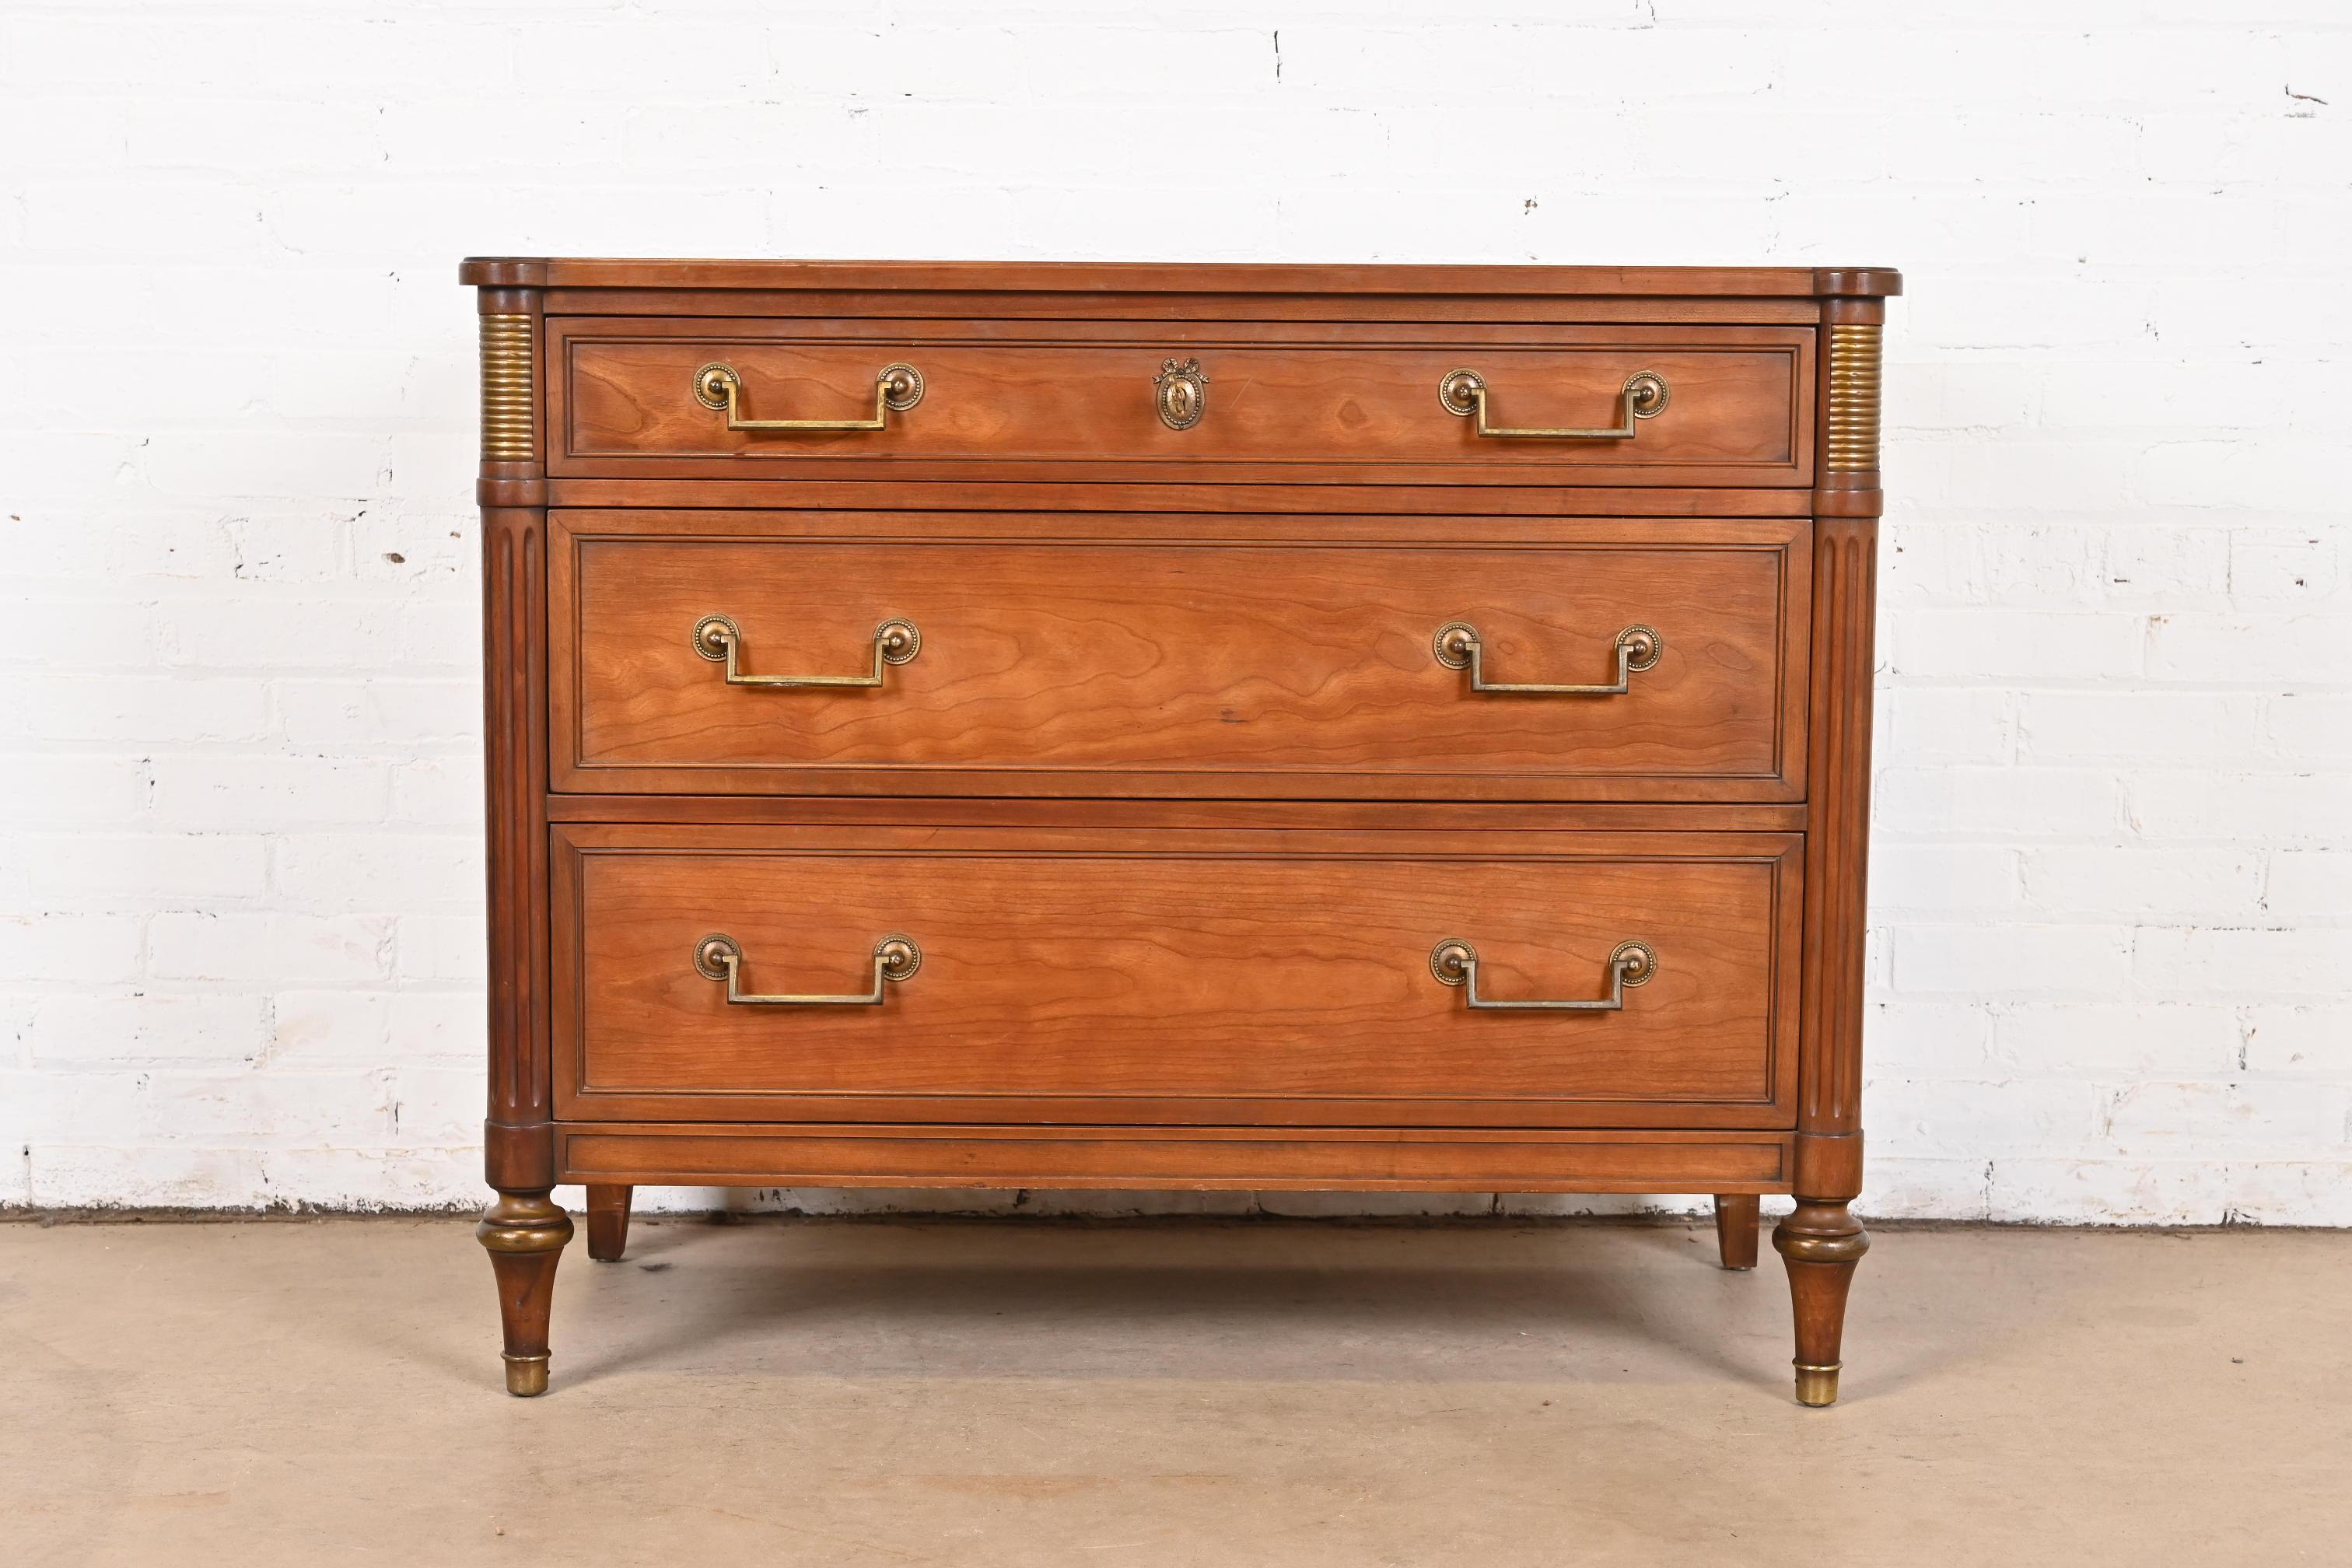 A gorgeous French Regency Louis XVI Directoire style three-drawer dresser or chest of drawers

By Kindel Furniture

USA, Circa 1960s

Cherry wood, with brass hardware and accents.

Measures: 39.75